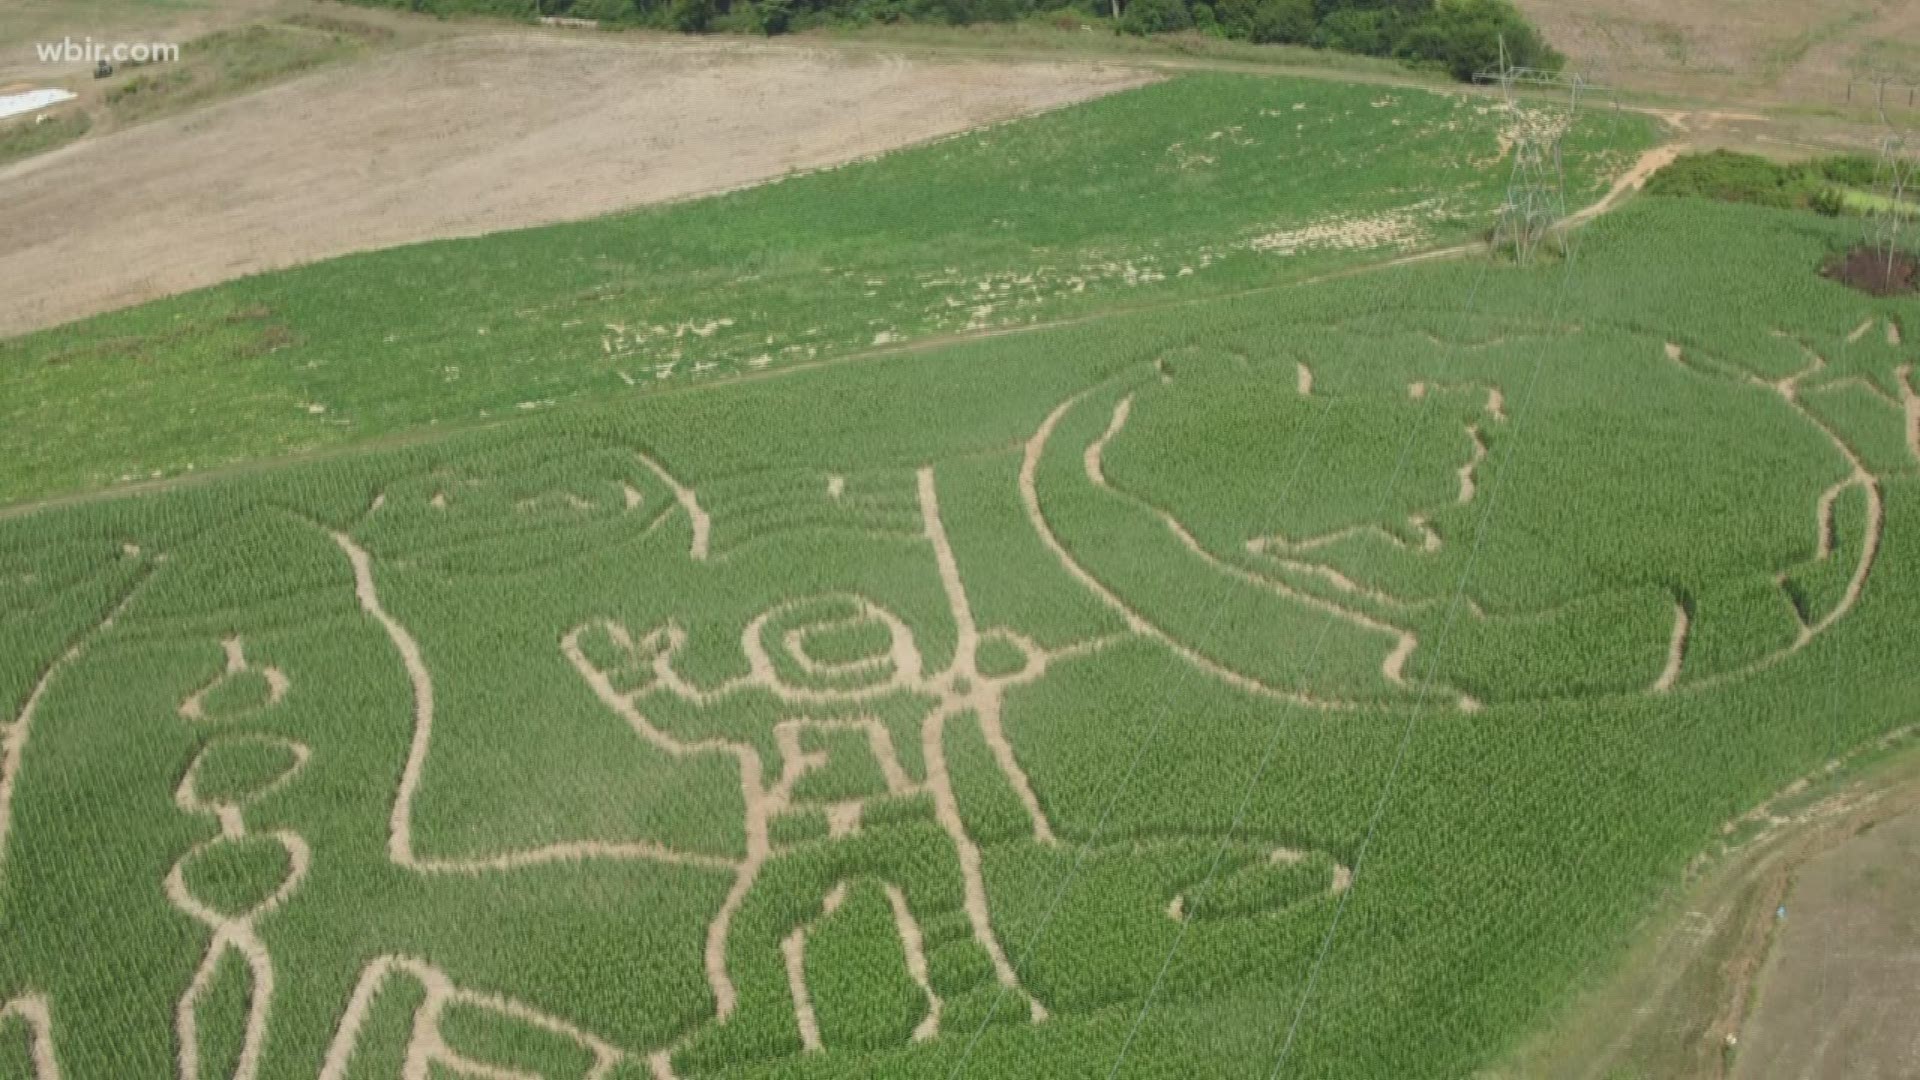 A local farm is honoring the 50th anniversary of the moon landing with its corn maze. A spokesperson for Ballinger Farm says its "crazy maze" helps bring in some extra money.